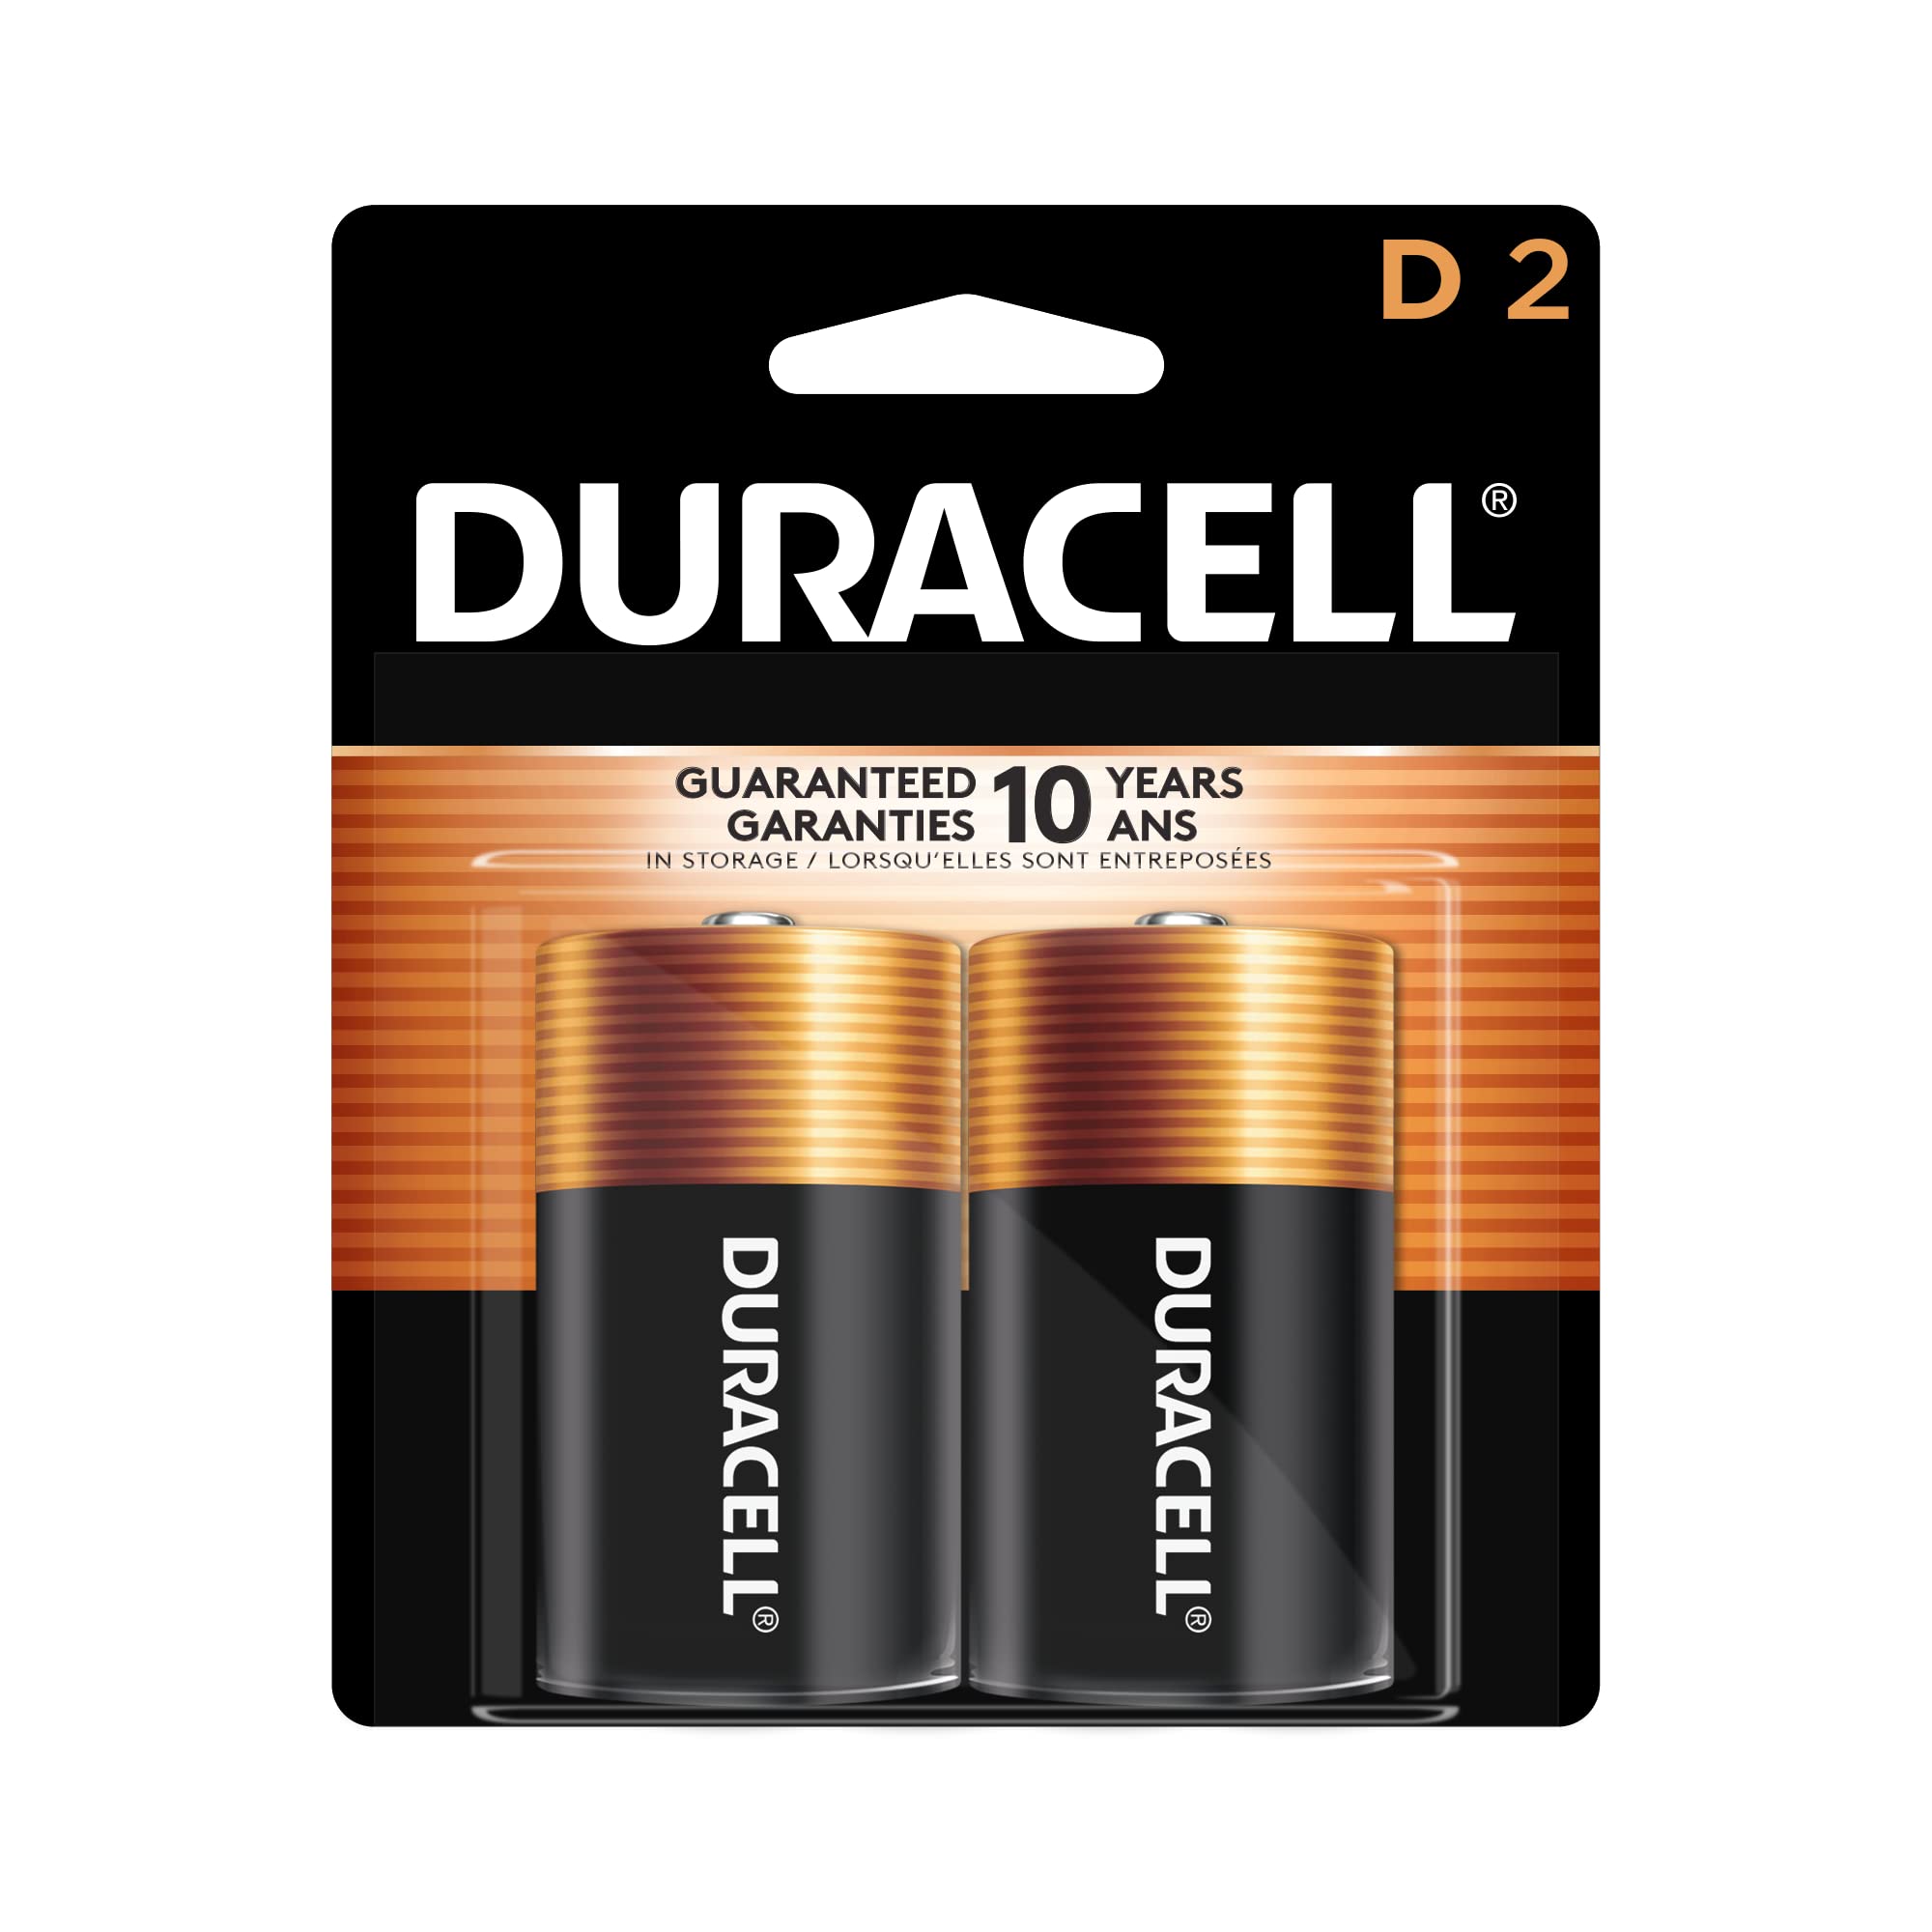 Duracell Duralock DL 2032 225mAh 3V Lithium Coin Cell Battery [Set of 6] or  Sold as 6/BX